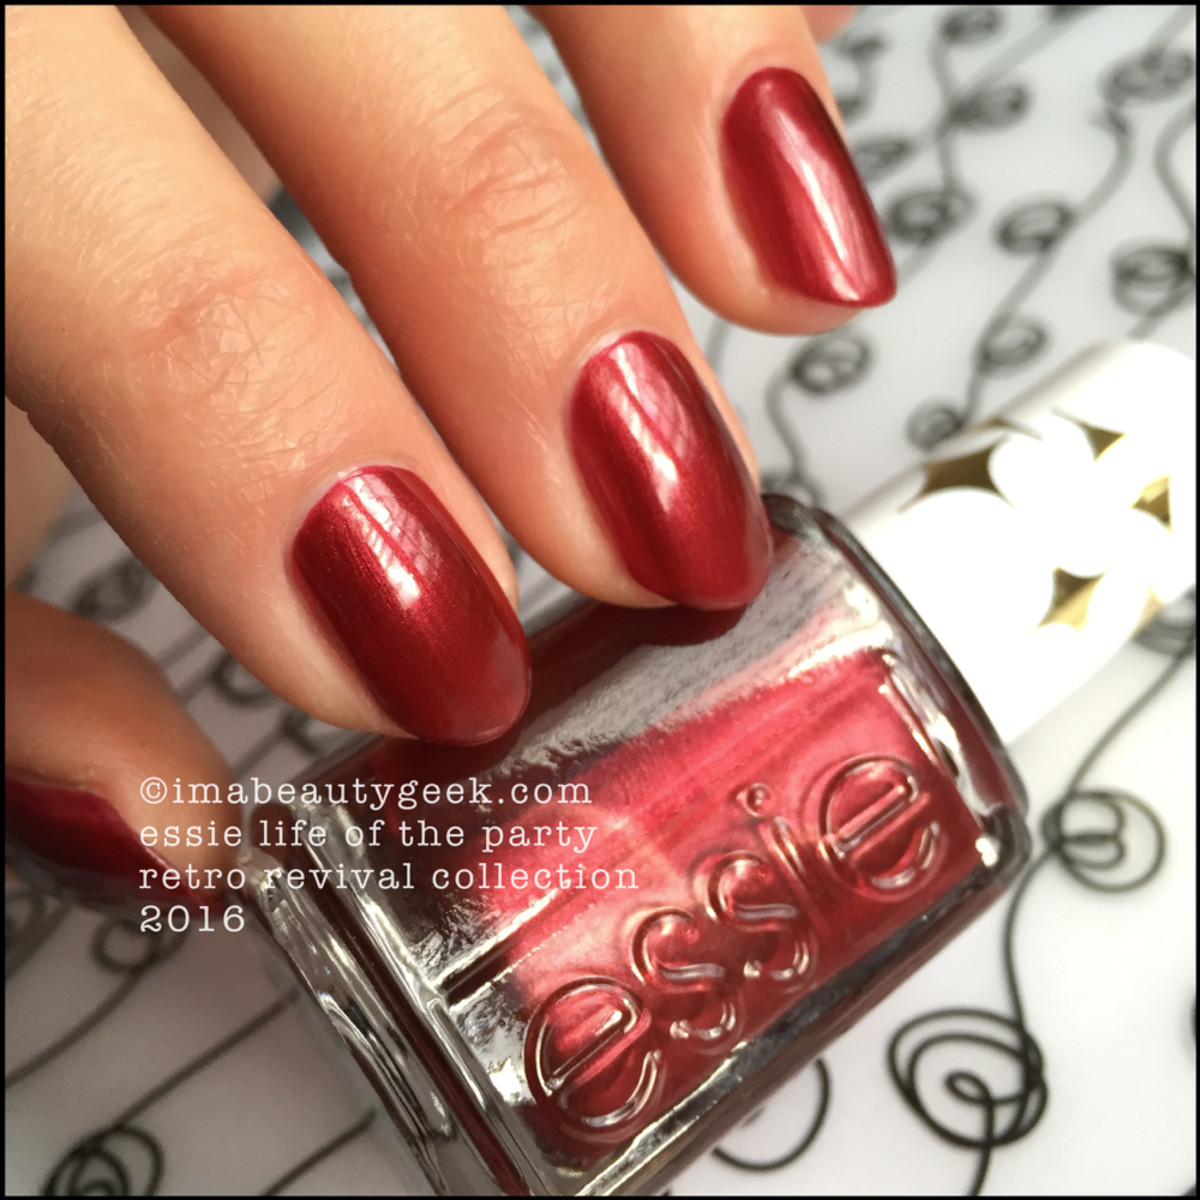 Essie Life of the Party_Essie Retro Revival Collection Swatches 2016